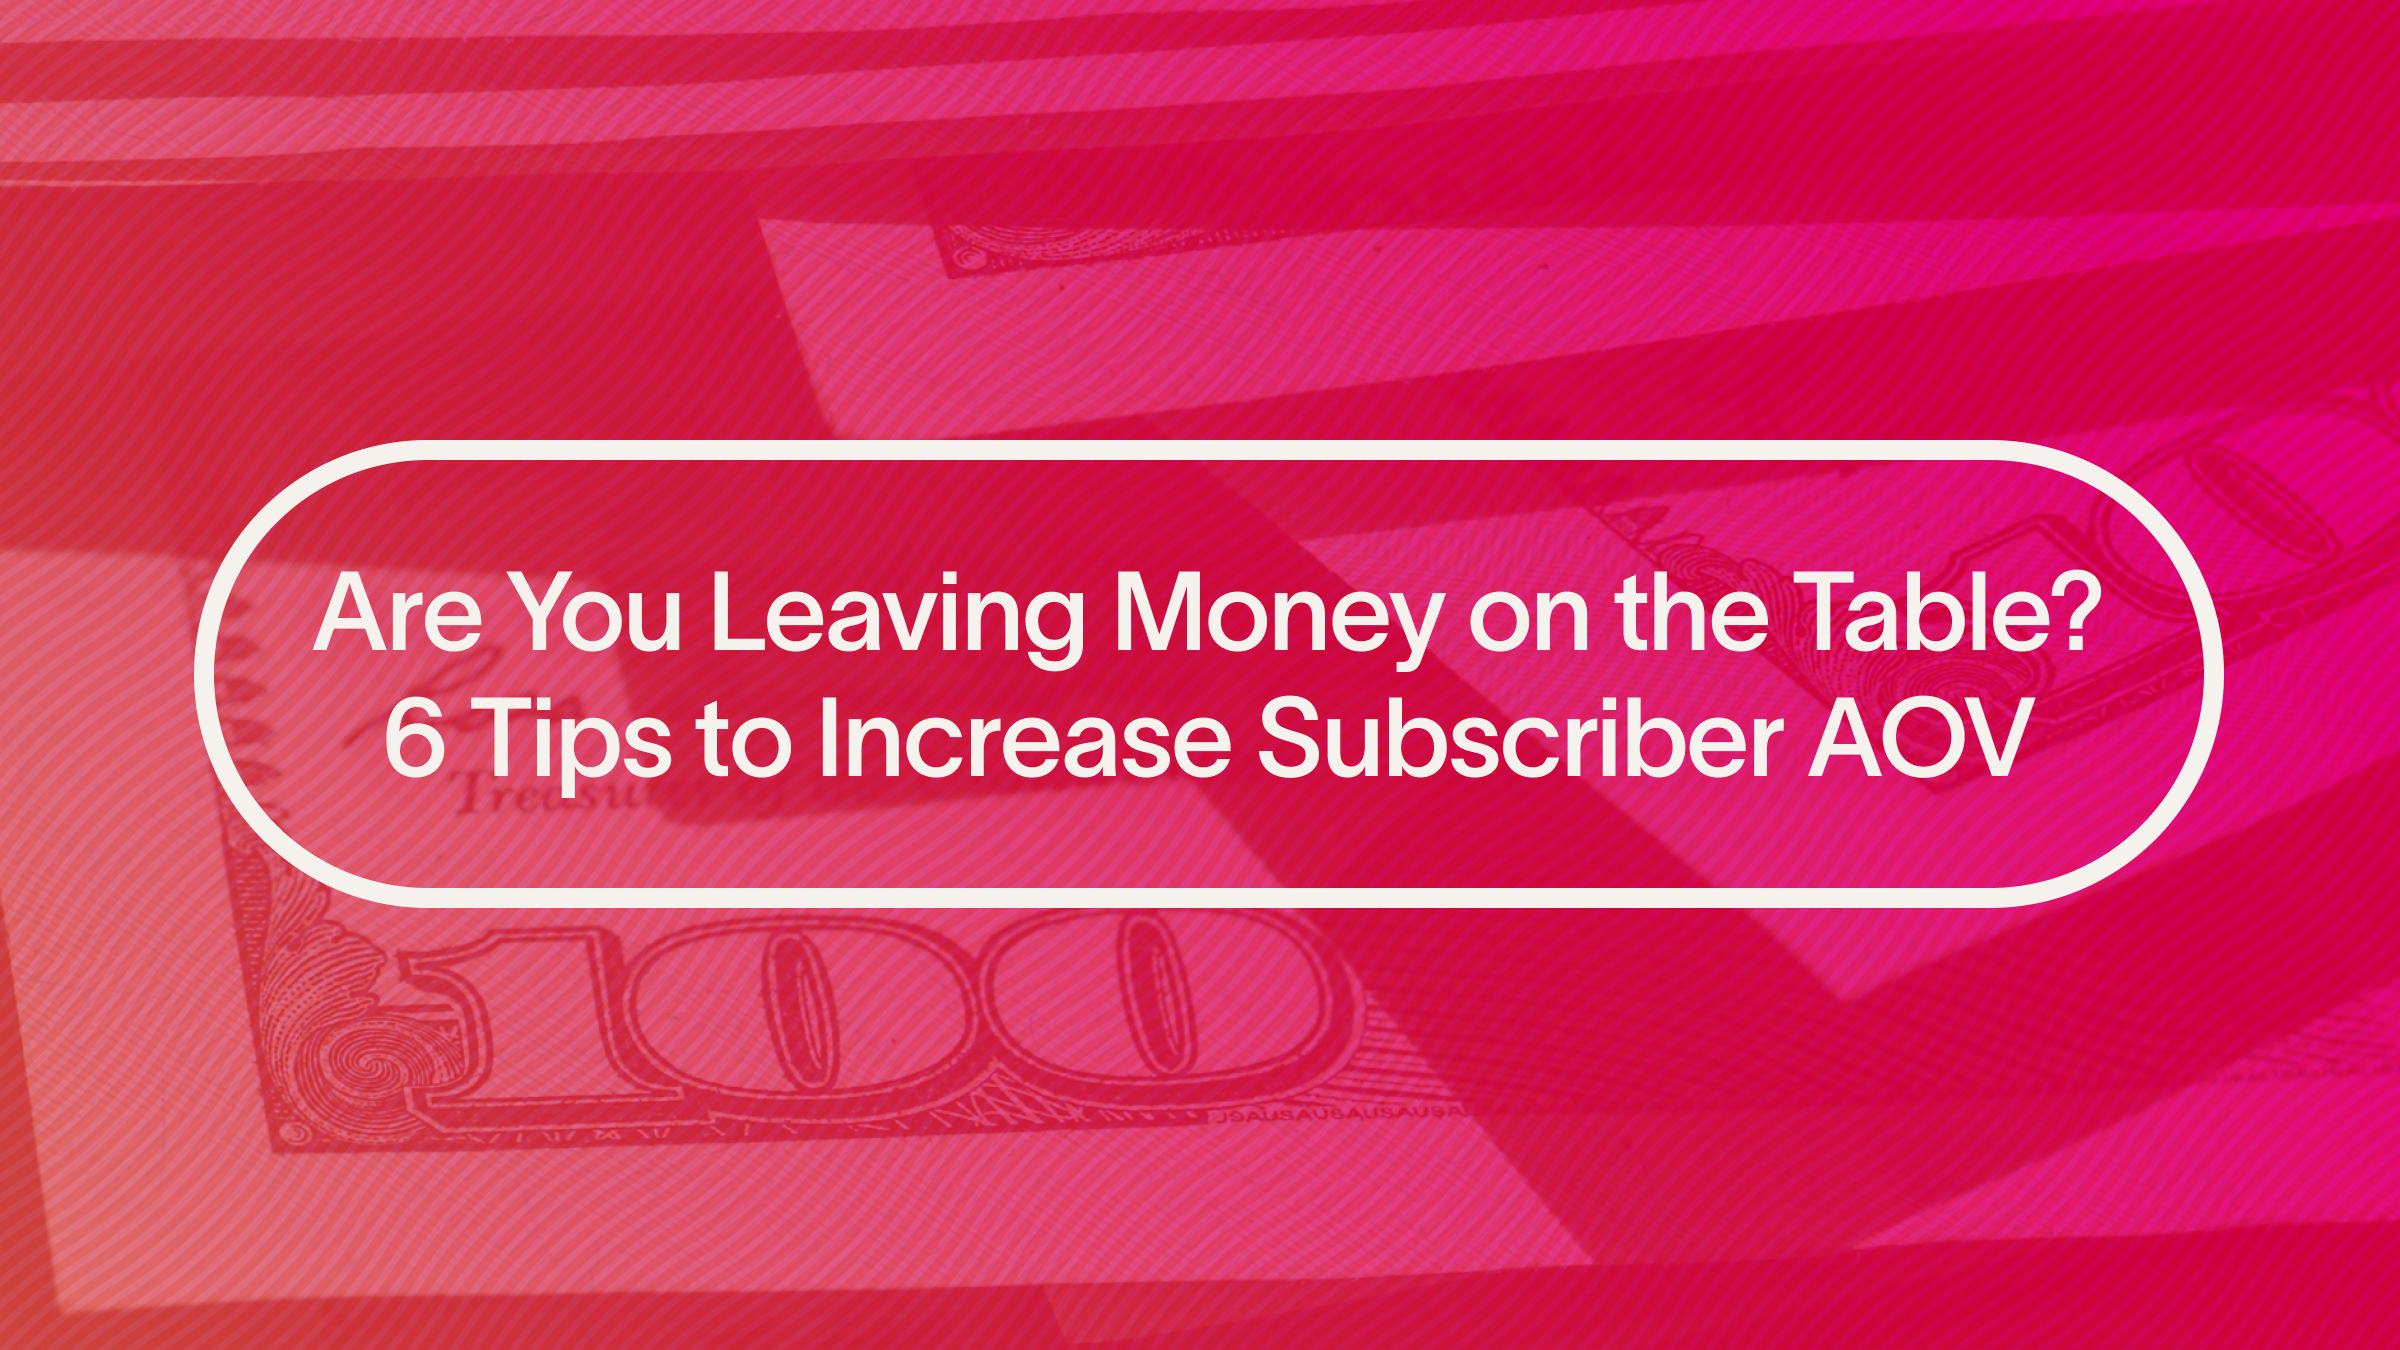 Are You Leaving Money on the Table? 6 Tips to Increase Subscriber AOV